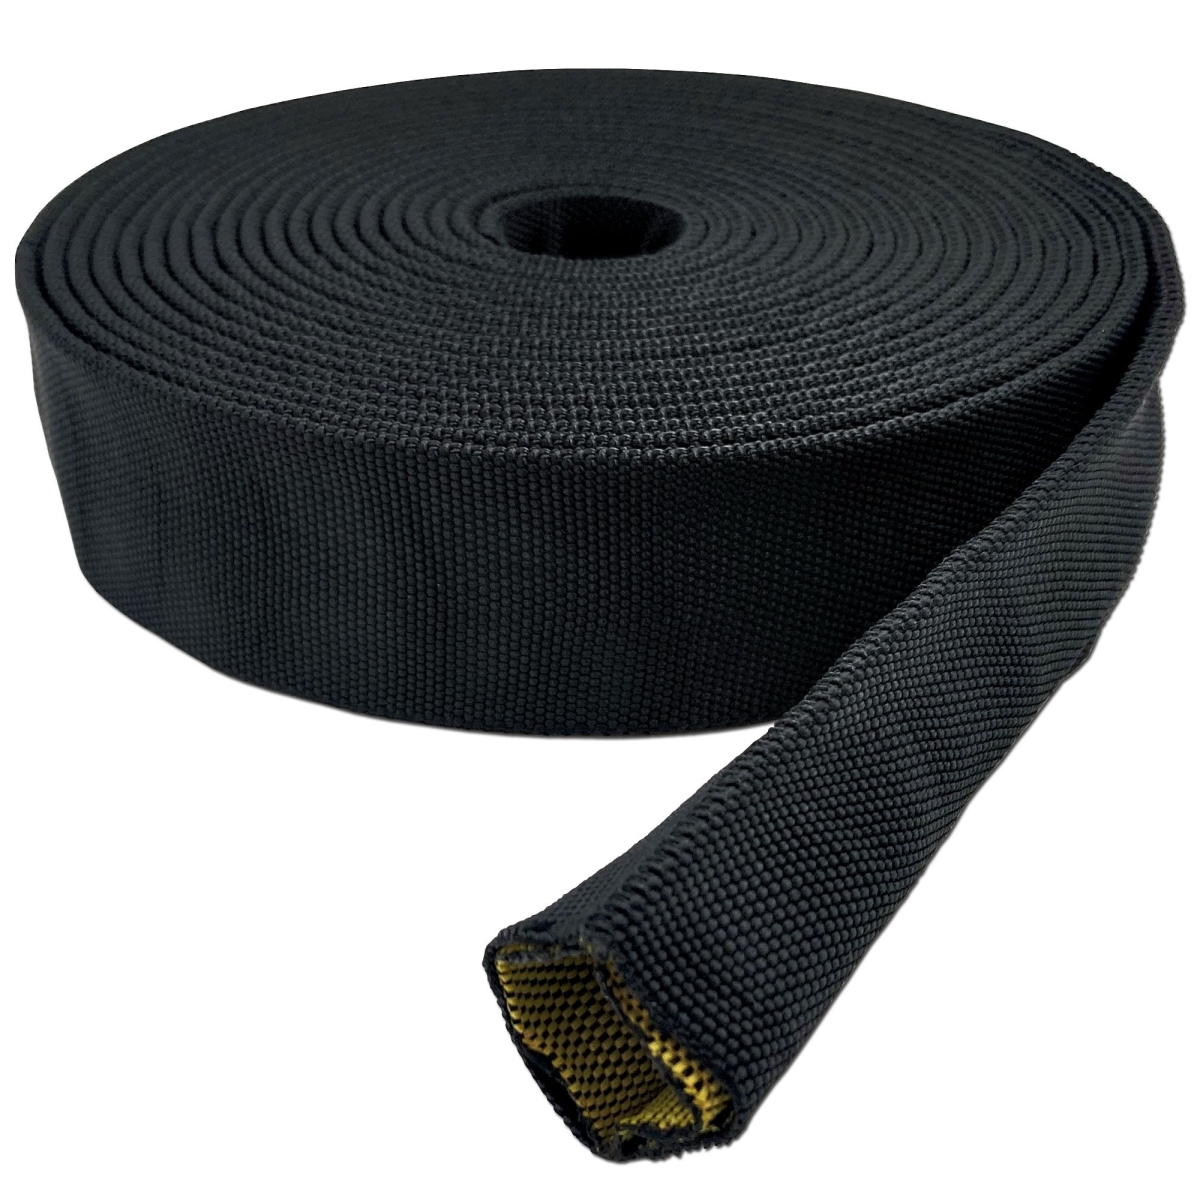 Picture of Electriduct BS-J-BURST-250-10-BK 2.5 in. x 10 ft. Burst Protection Multifilament Nylon Braided Sleeving - Black